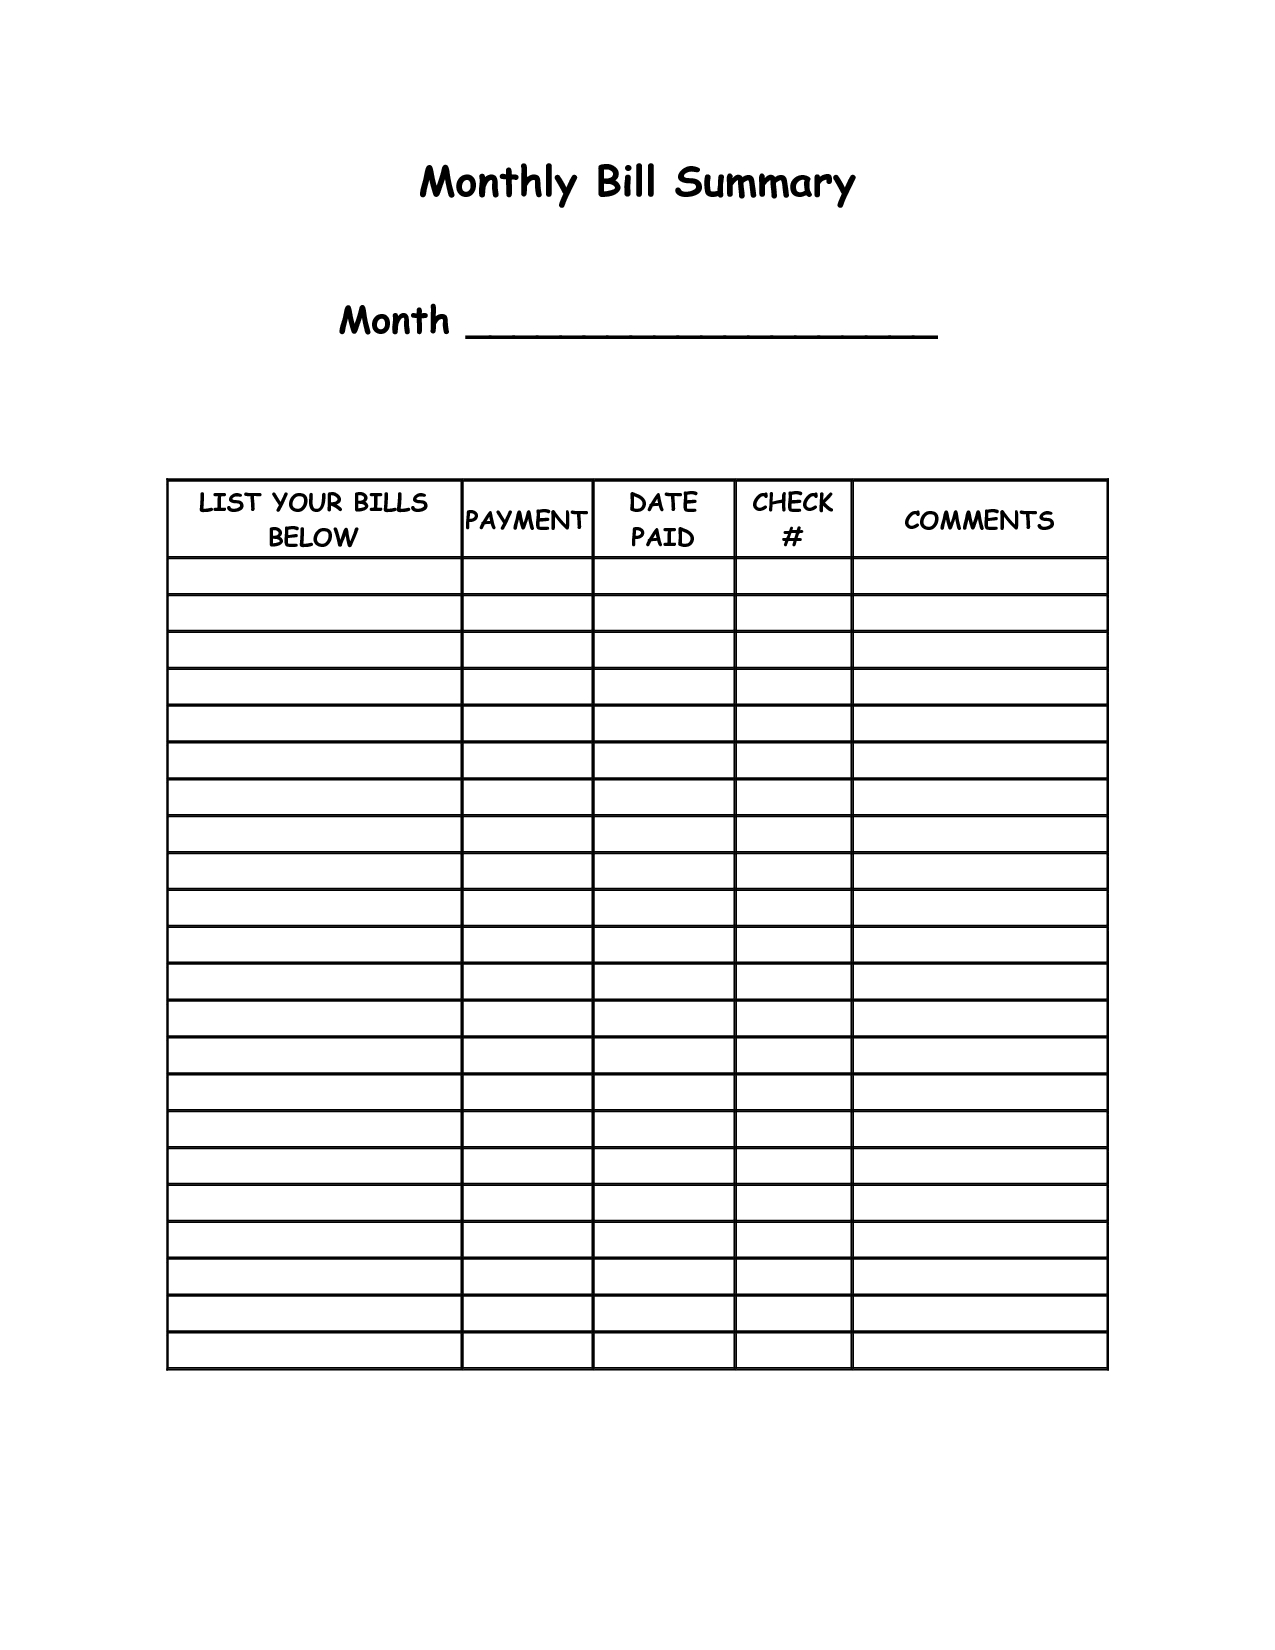 Monthly Bill Summary Doc | Monthly Bill, Organizing Monthly  Printable Monthly Payment Sheet